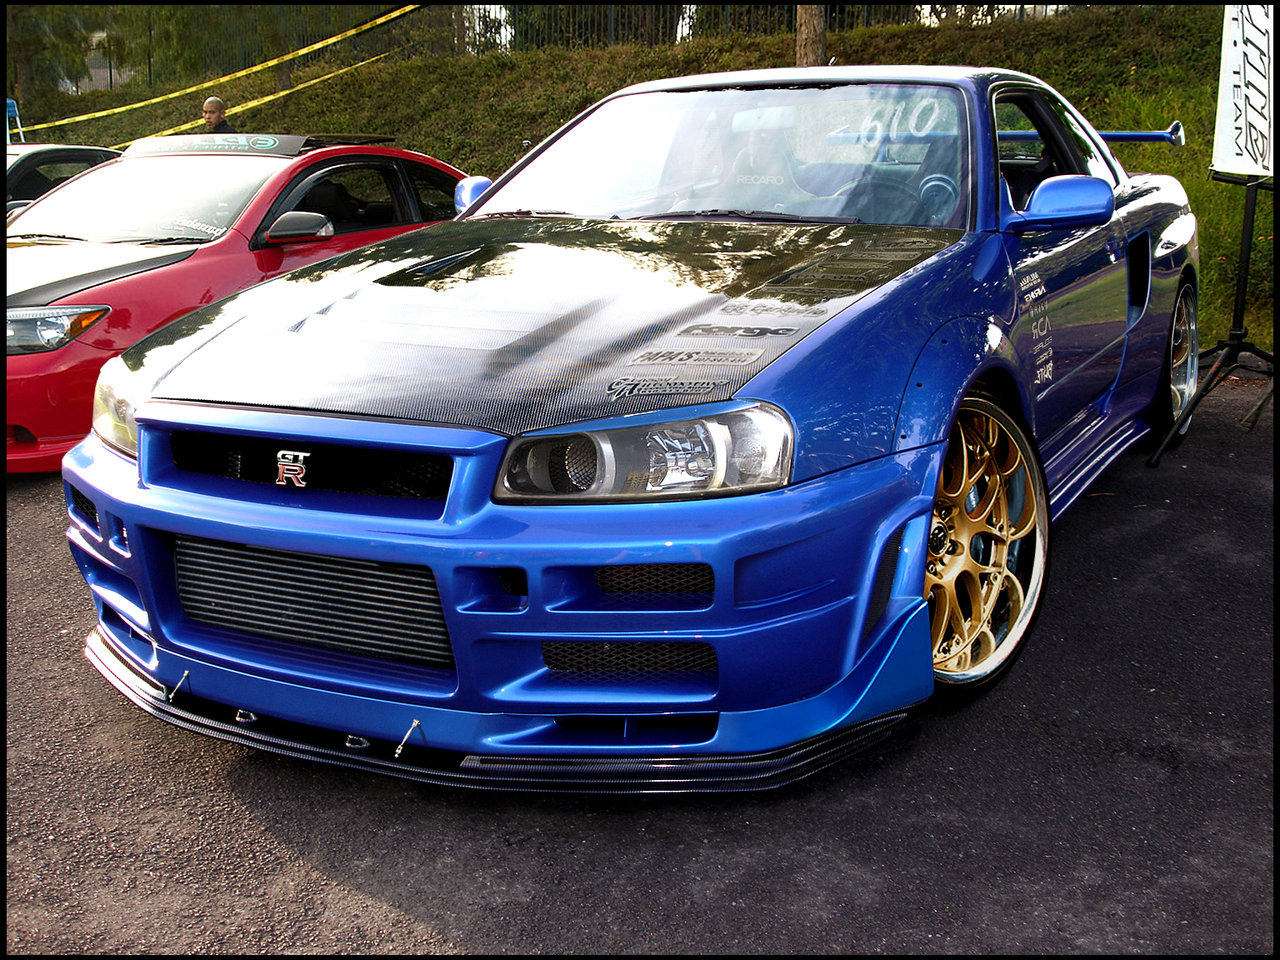 Are nissan skyline r34 illegal in california #6